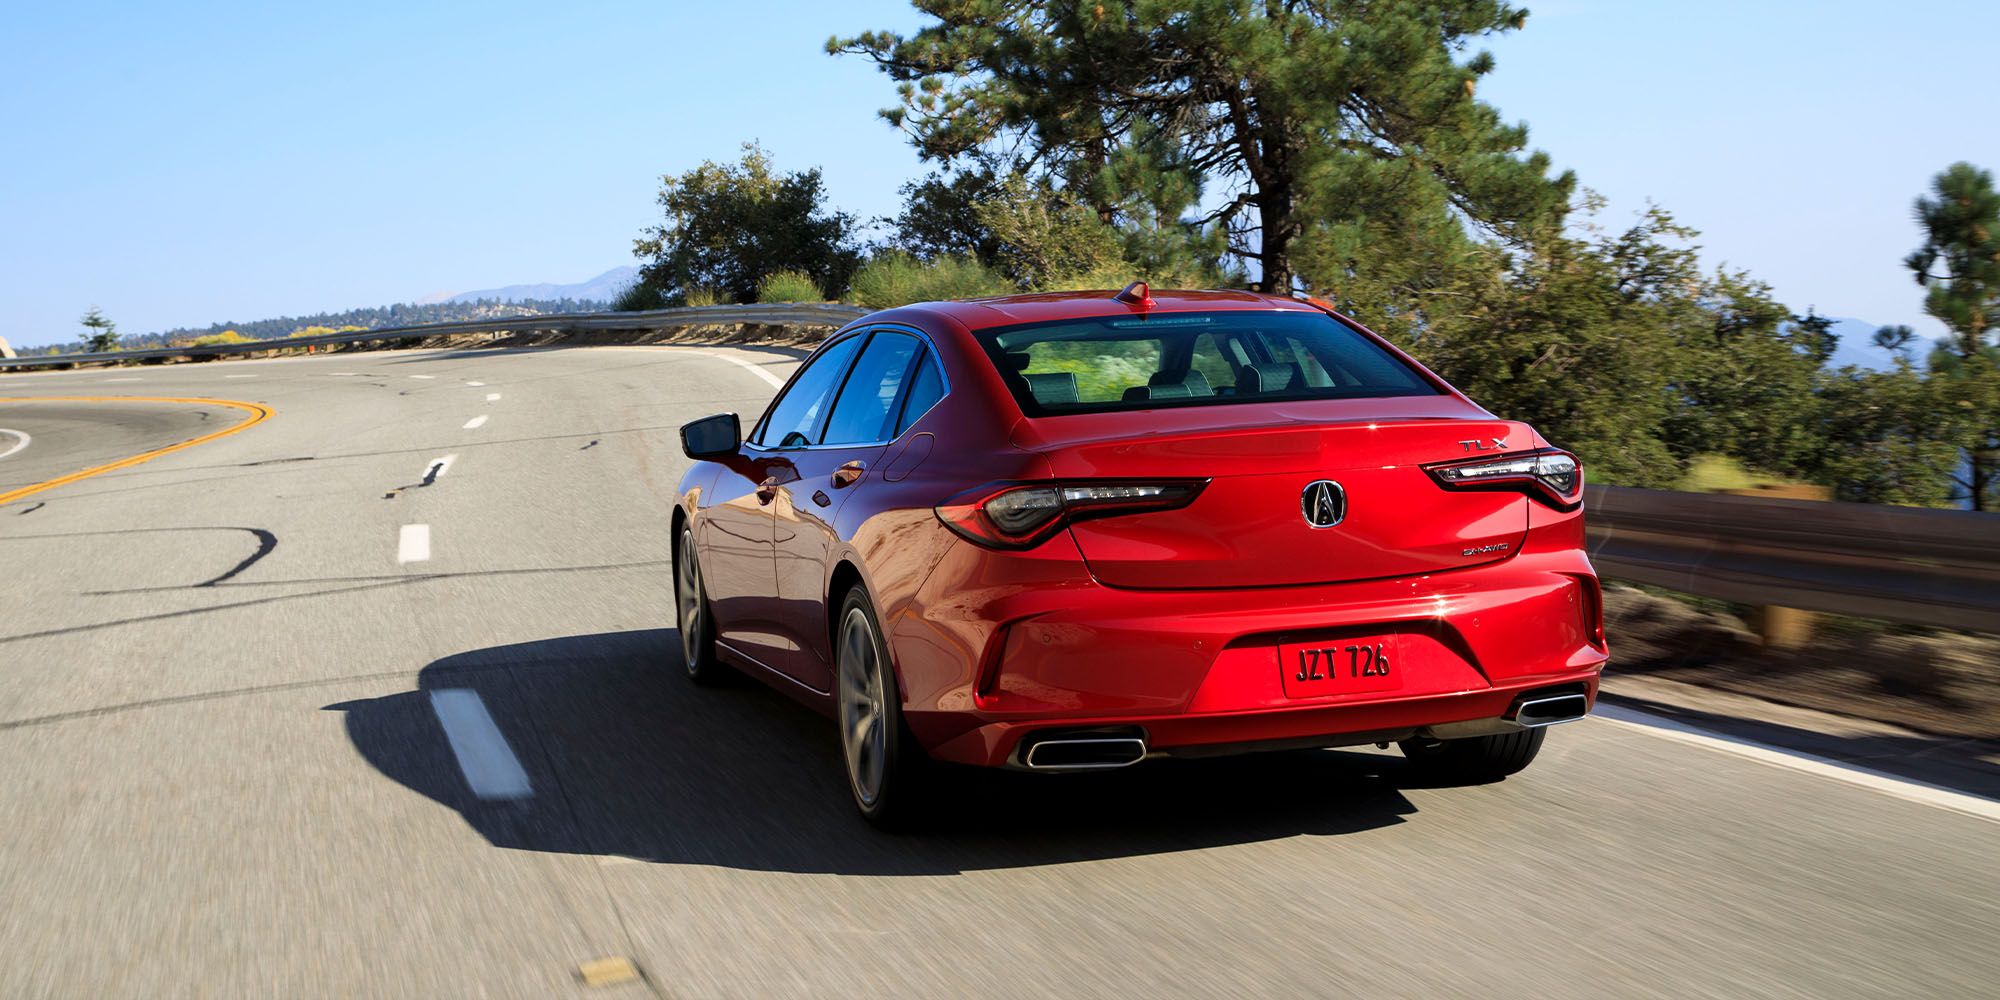 The rear of a red TLX Advance